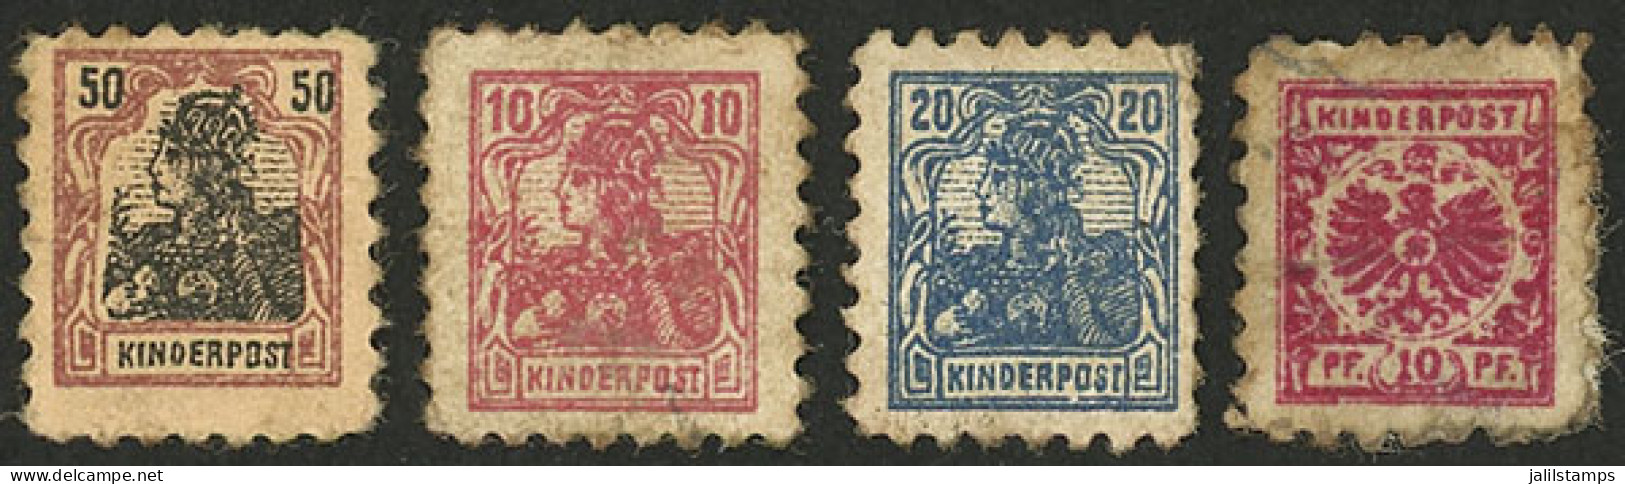 GERMANY: KINDERPOST: 4 Very Small Stamps, Minor Defects, Very Interesting! - Cinderellas